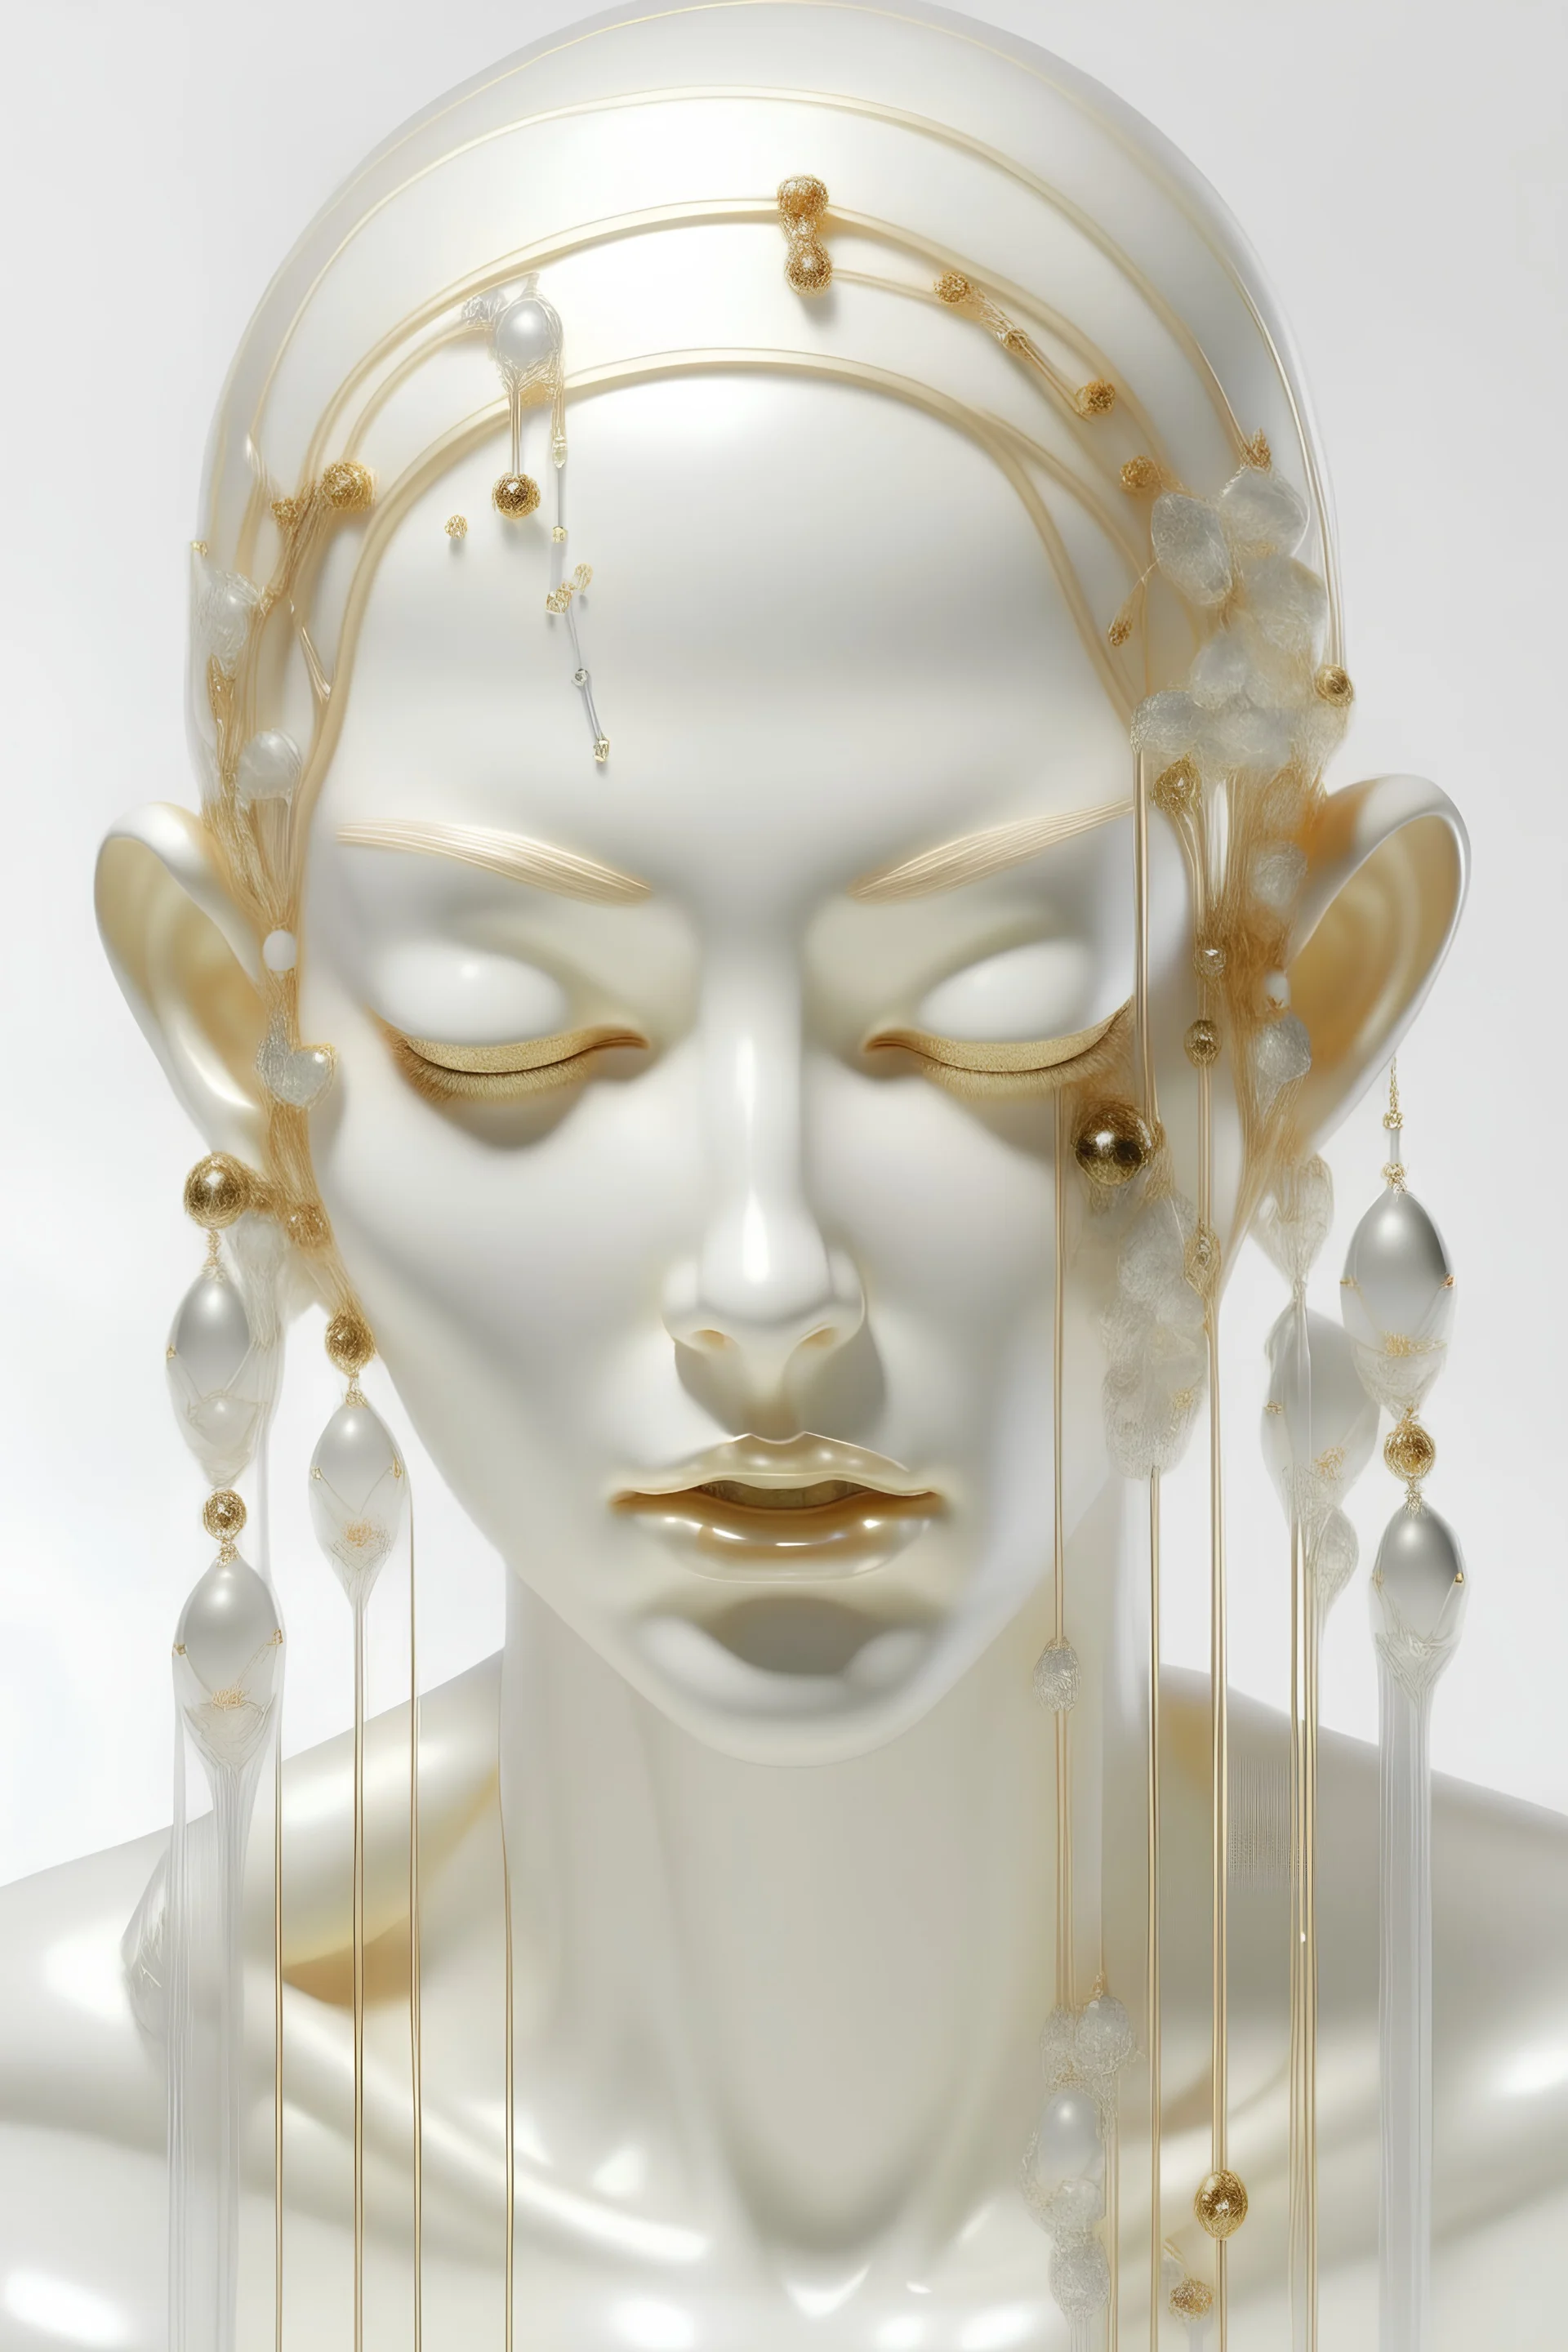 the piece shows the sad facial expressions of a female humanoid, 3 fluid transparent tubes in the background, in the style of glass-like sculpture, jocelyn hobbie, glitter and crystals on the top of the head, delicate constructions, light white, creamy white background, exquisite detail